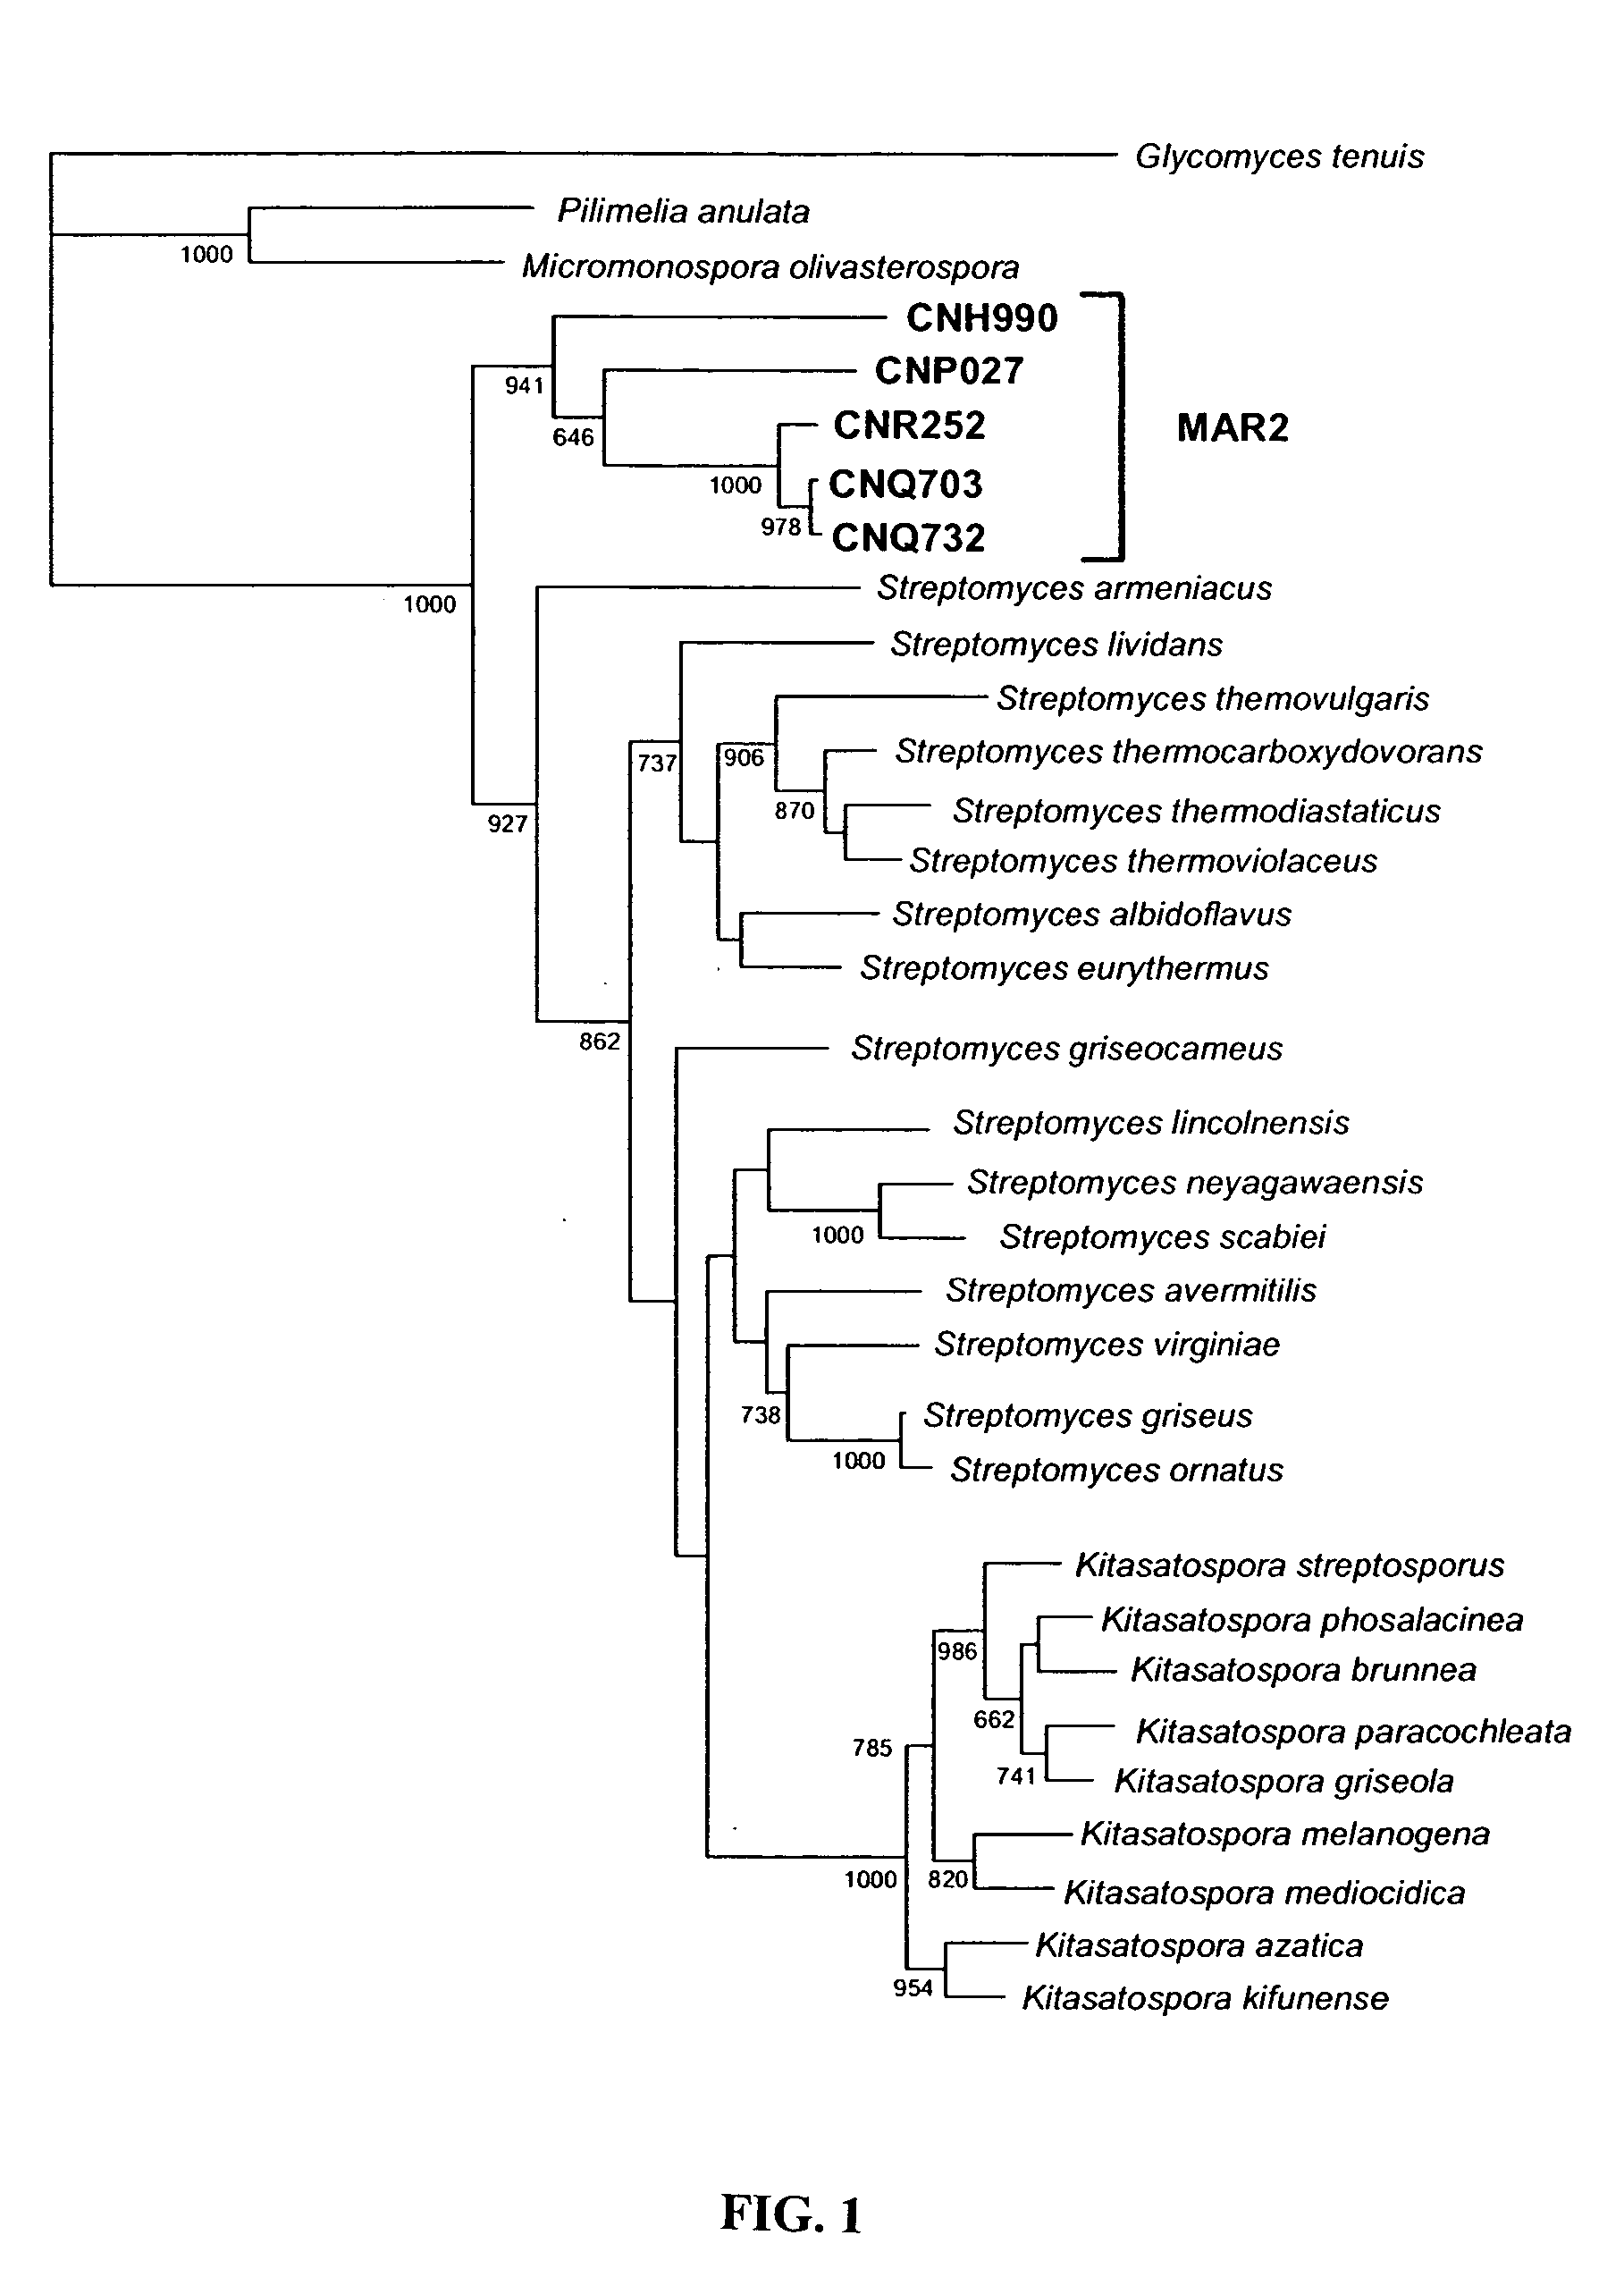 Method for the production of bioactive substances from the novel actinomycete taxon MAR2 ("Marinophilus")